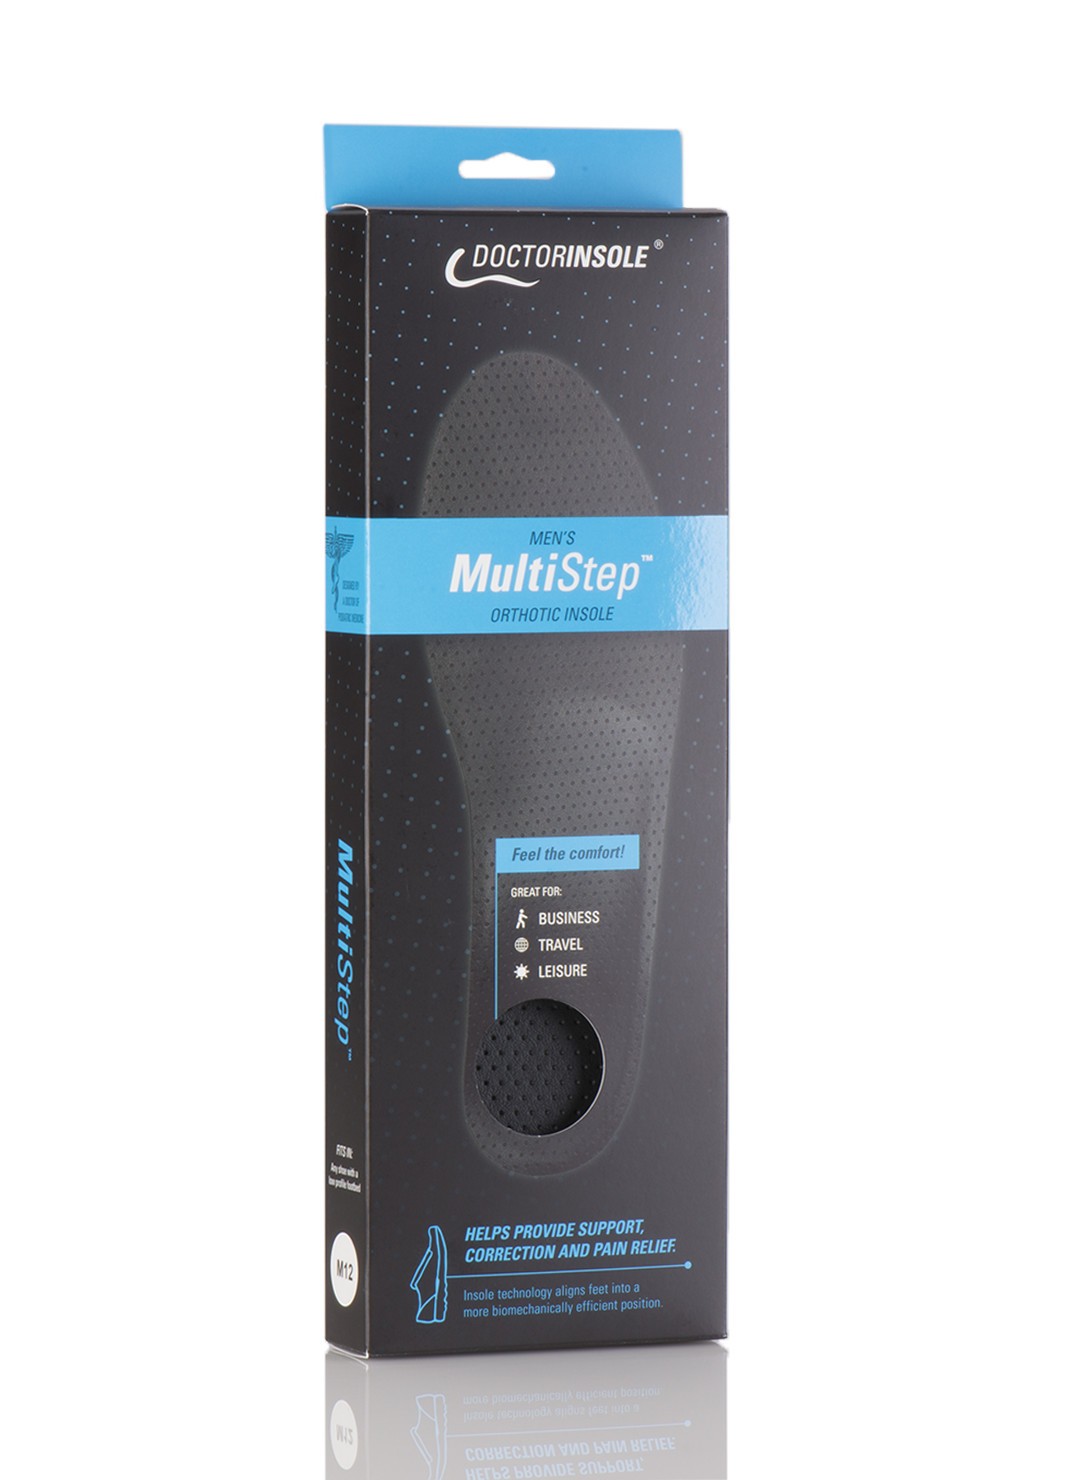 What are some good orthotics shoe inserts?